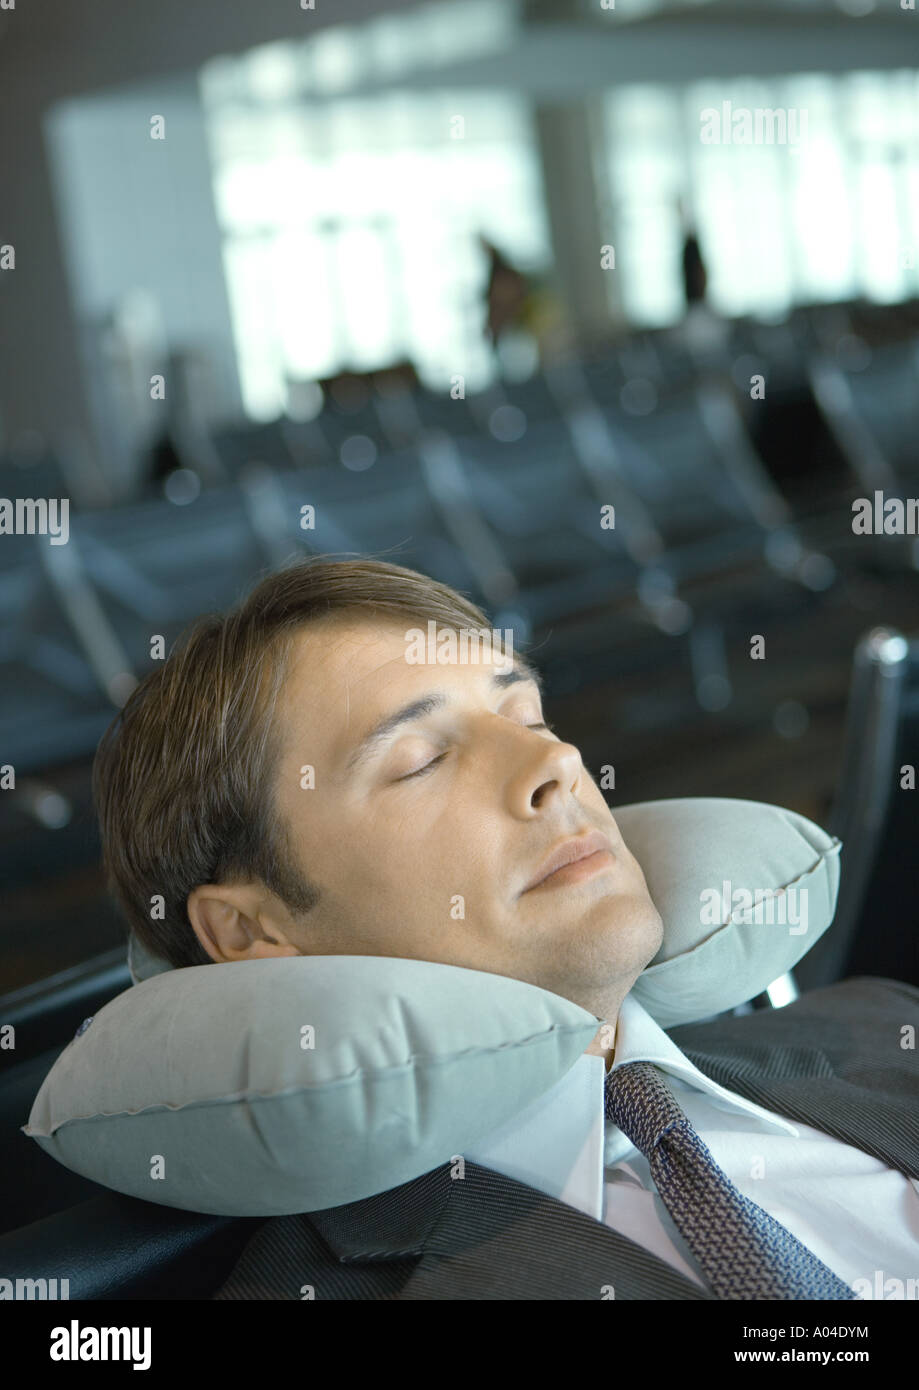 Man resting with neck pillow in airport lounge Stock Photo